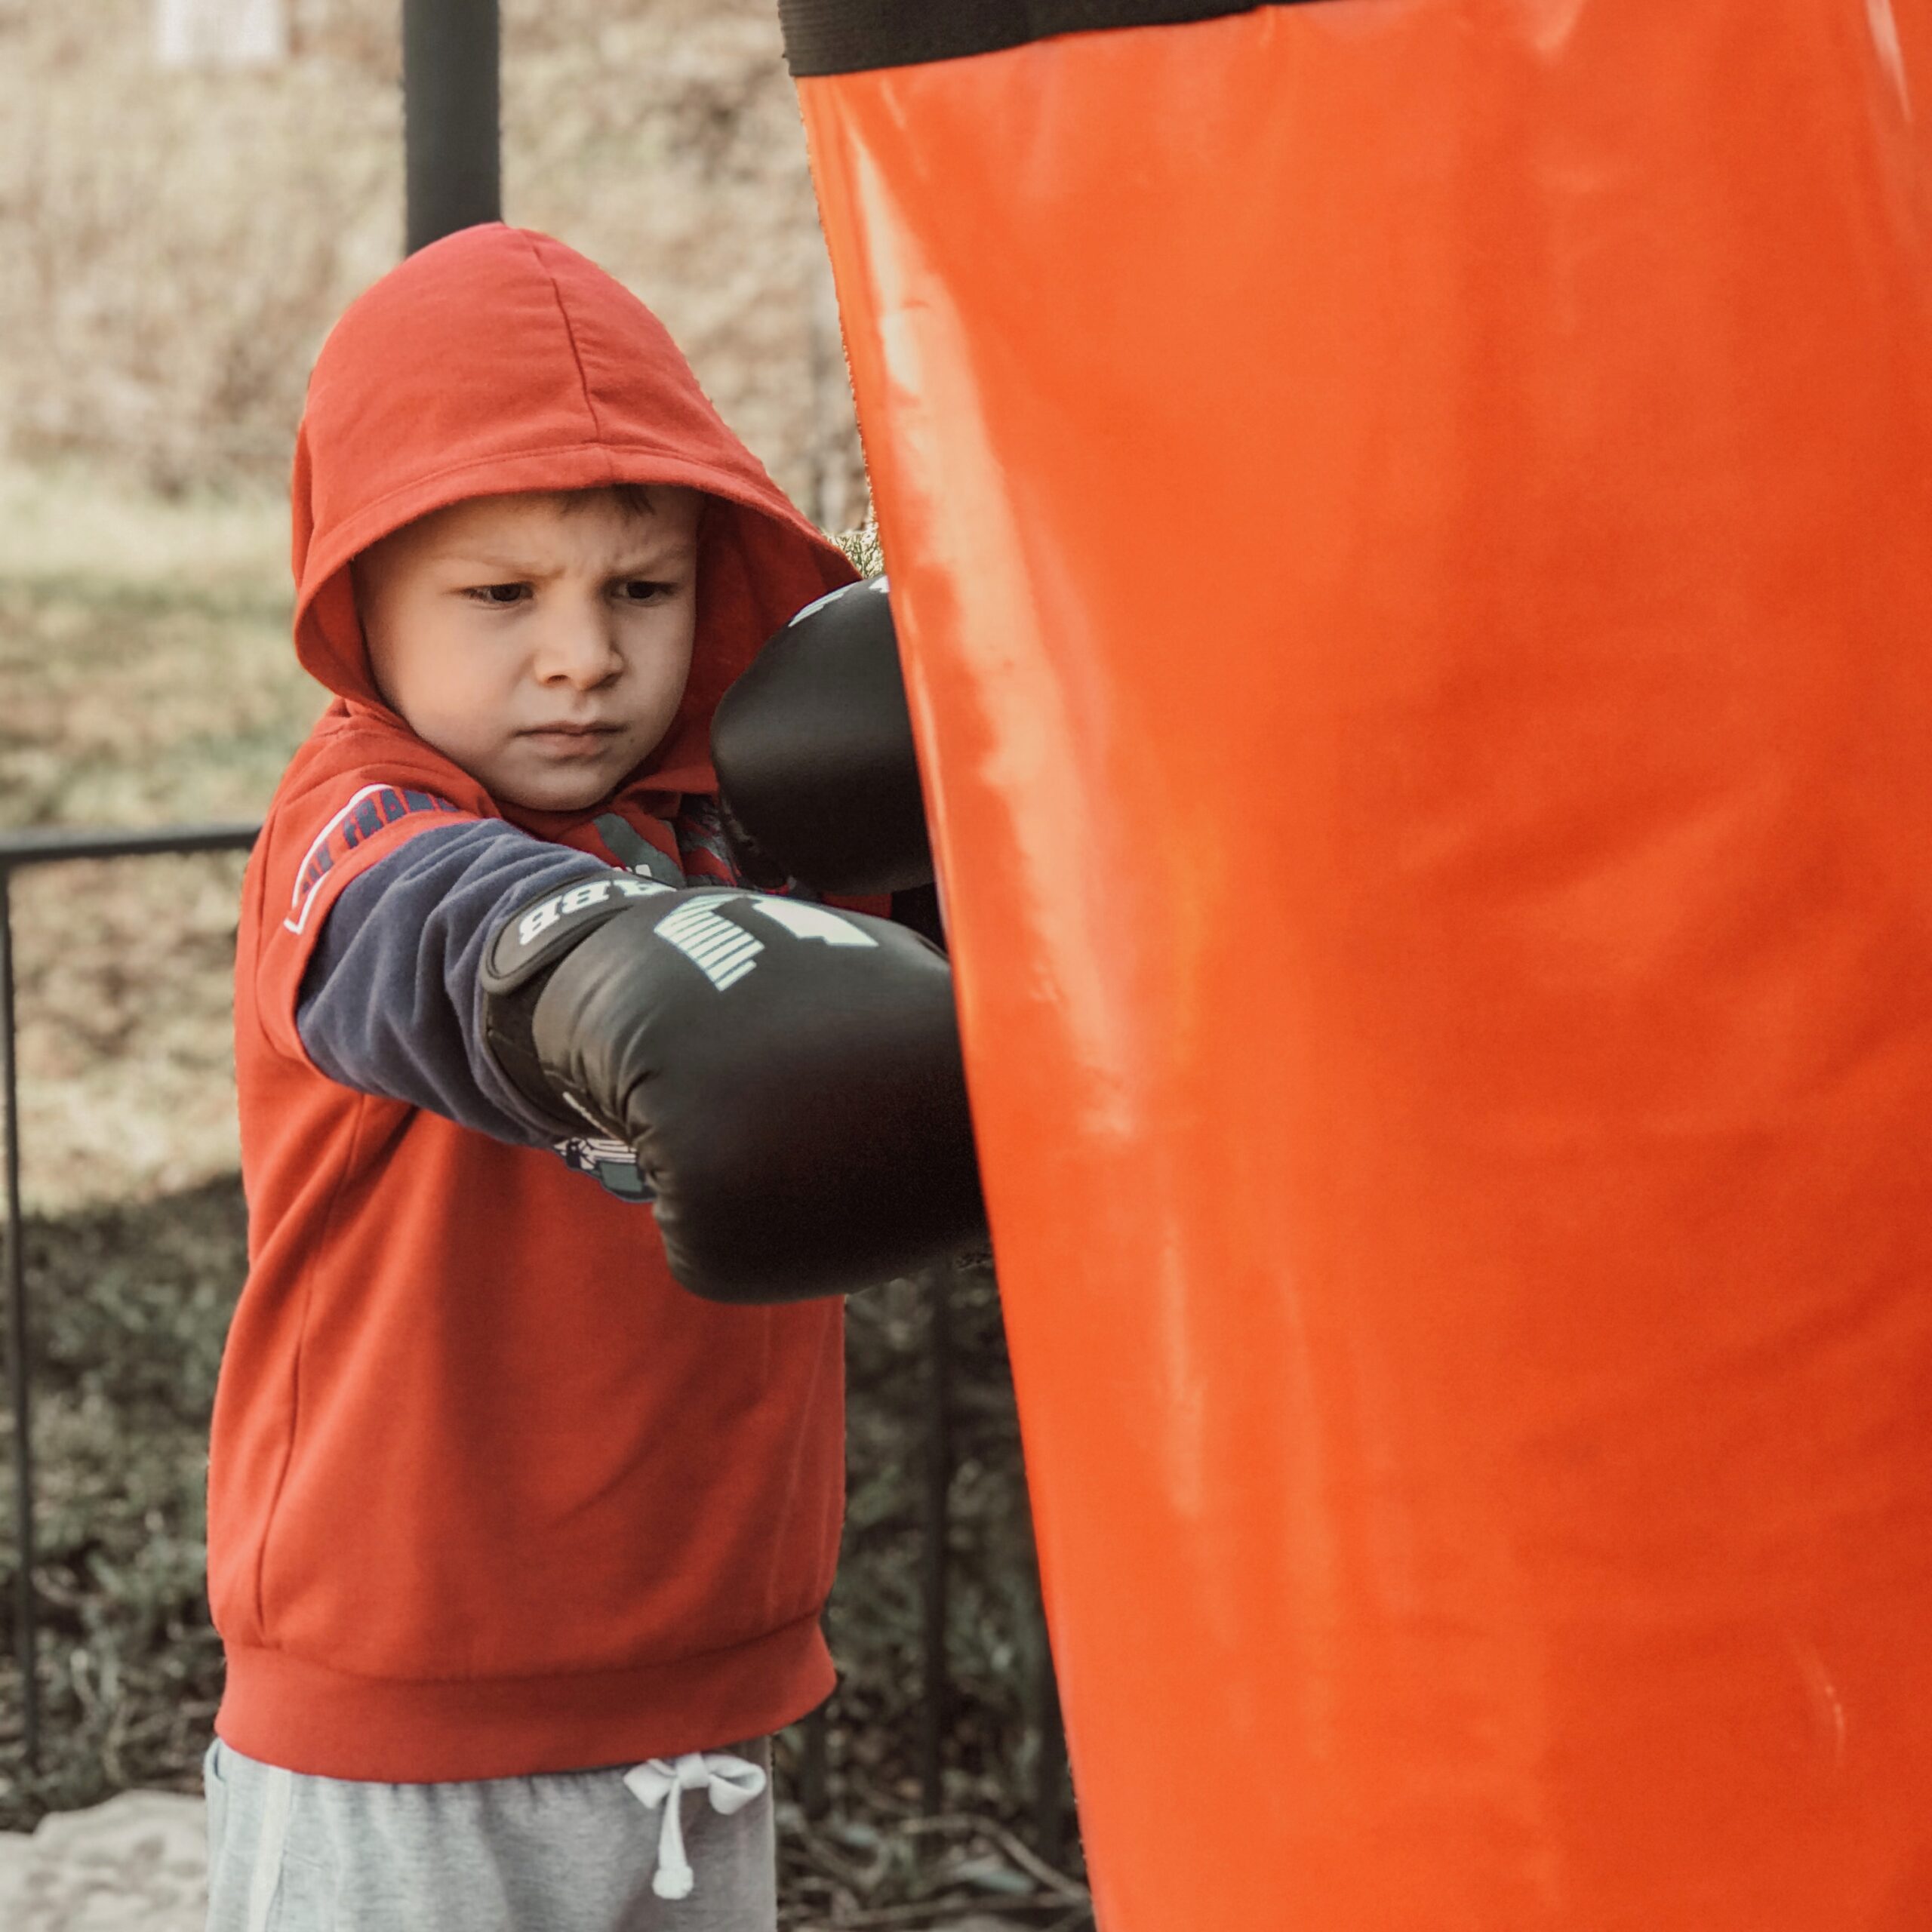 Top 10 Best Free Standing Punching Bag for Kids